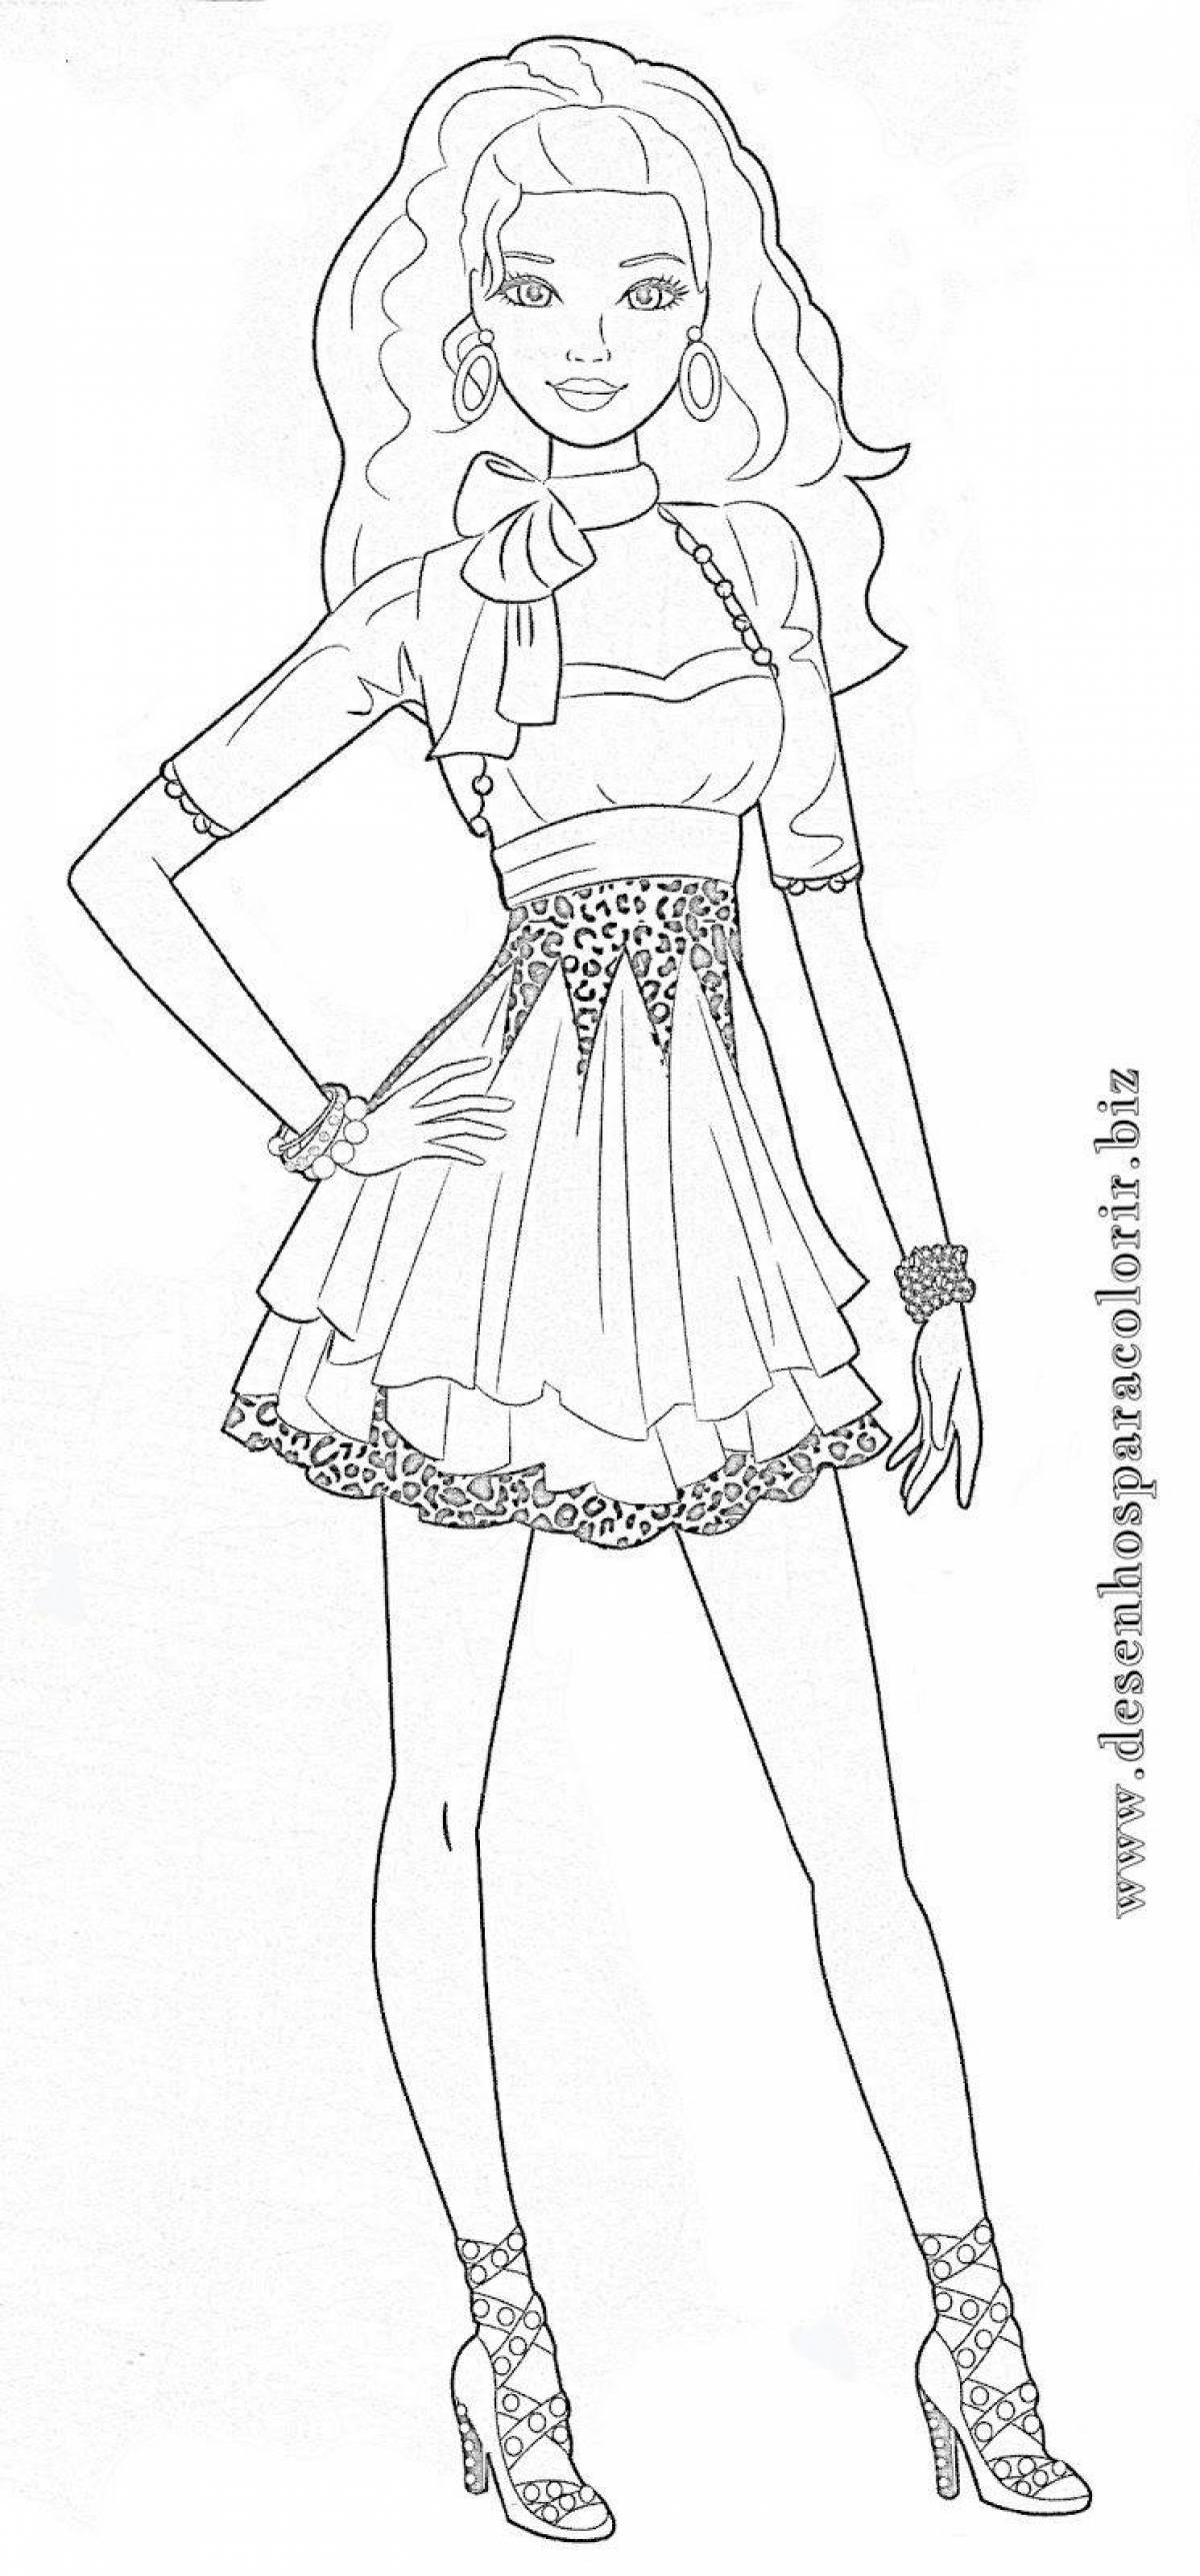 Radiant coloring page full body girl